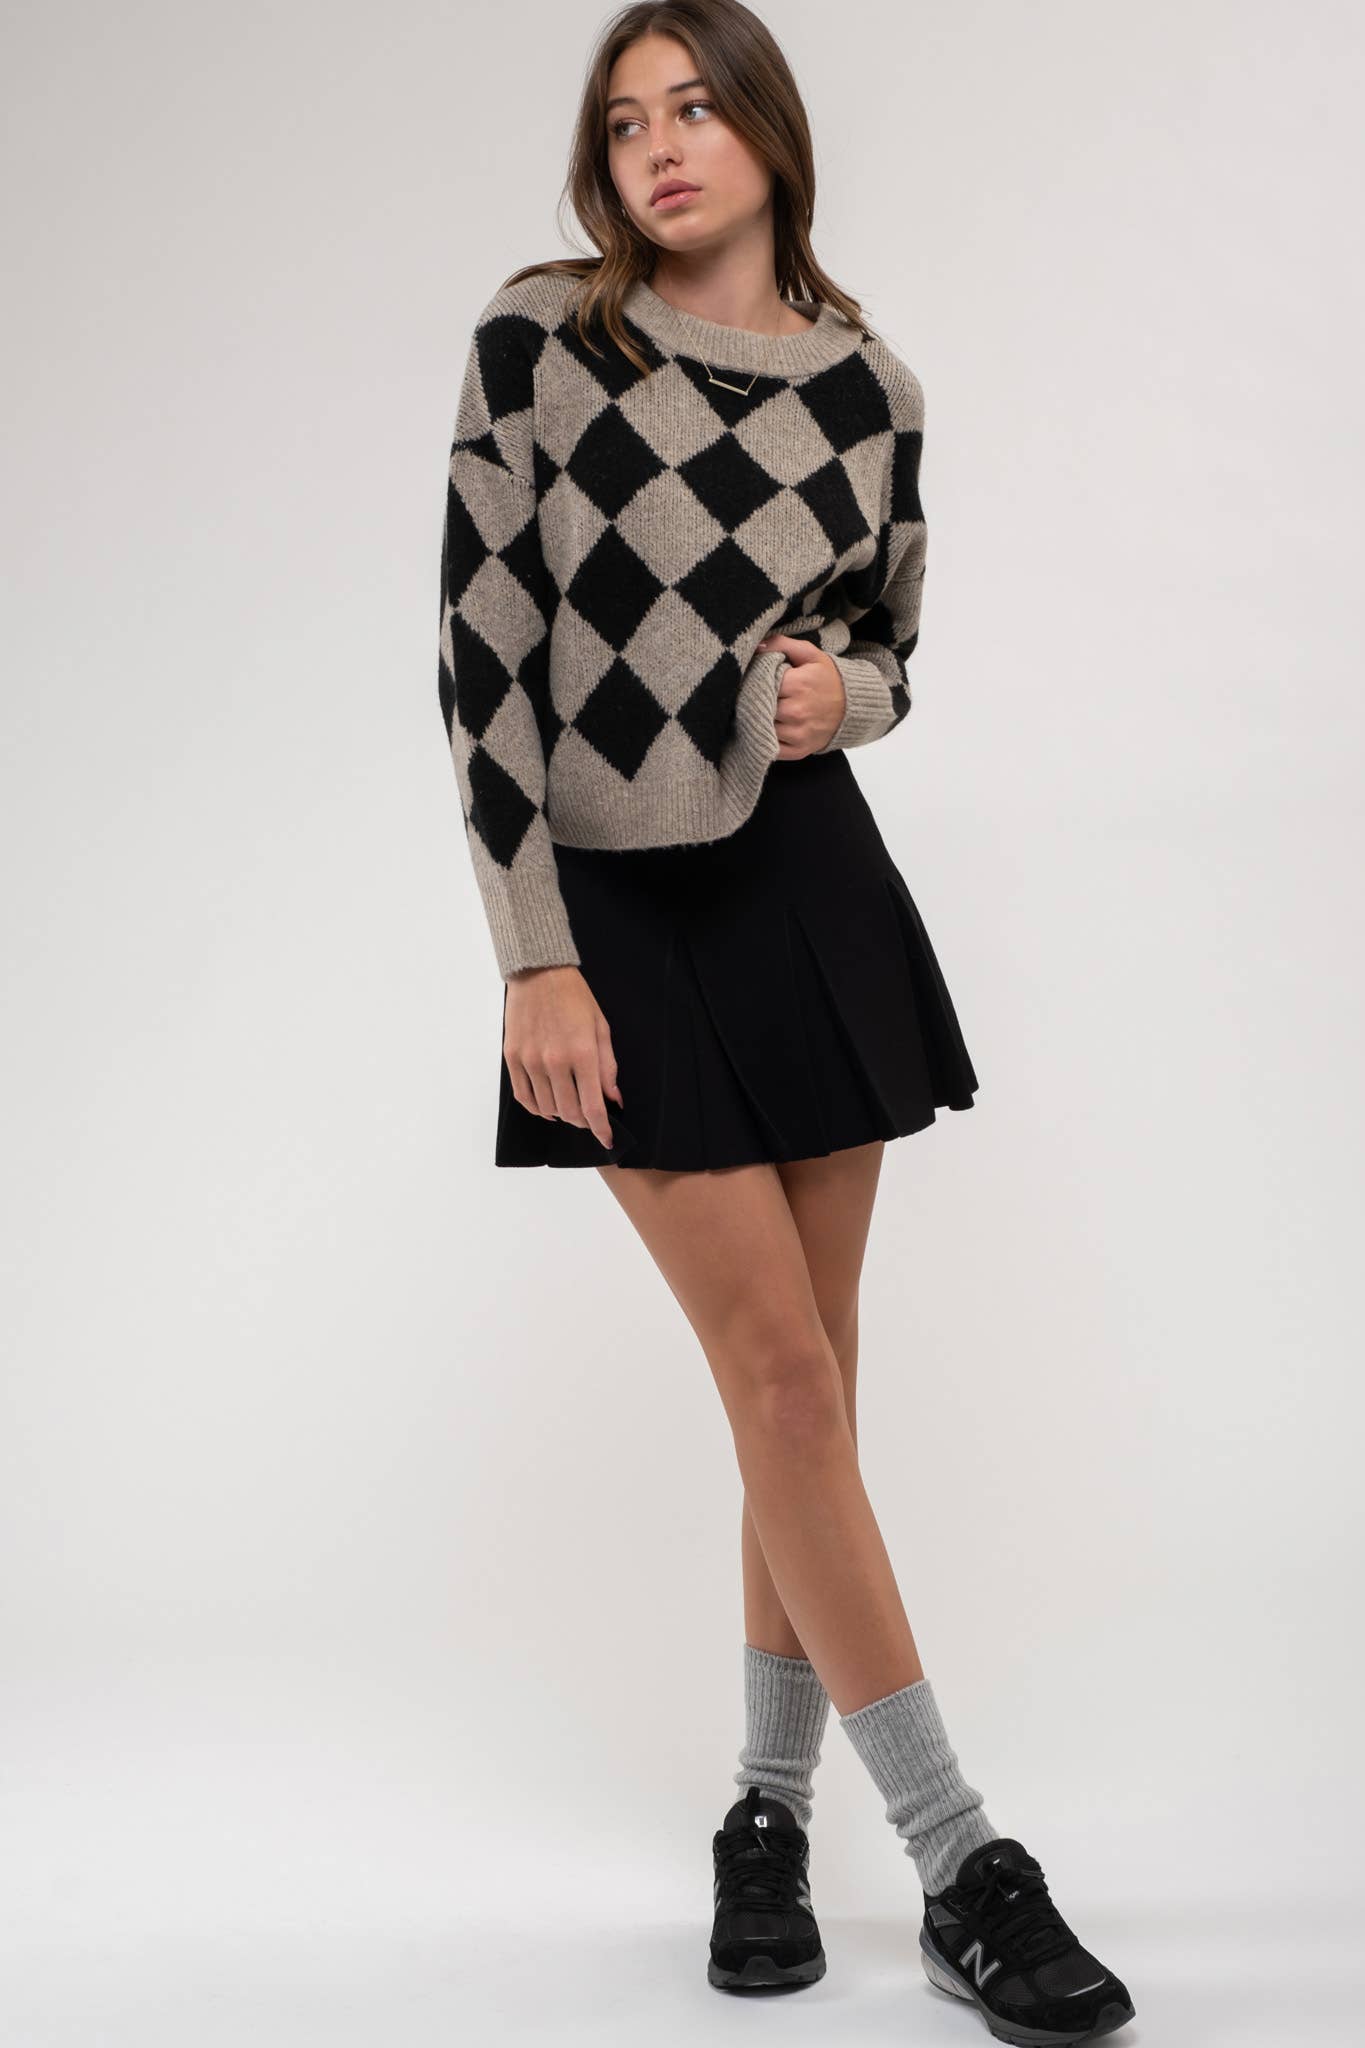 The Quinn Crew Knit Sweater